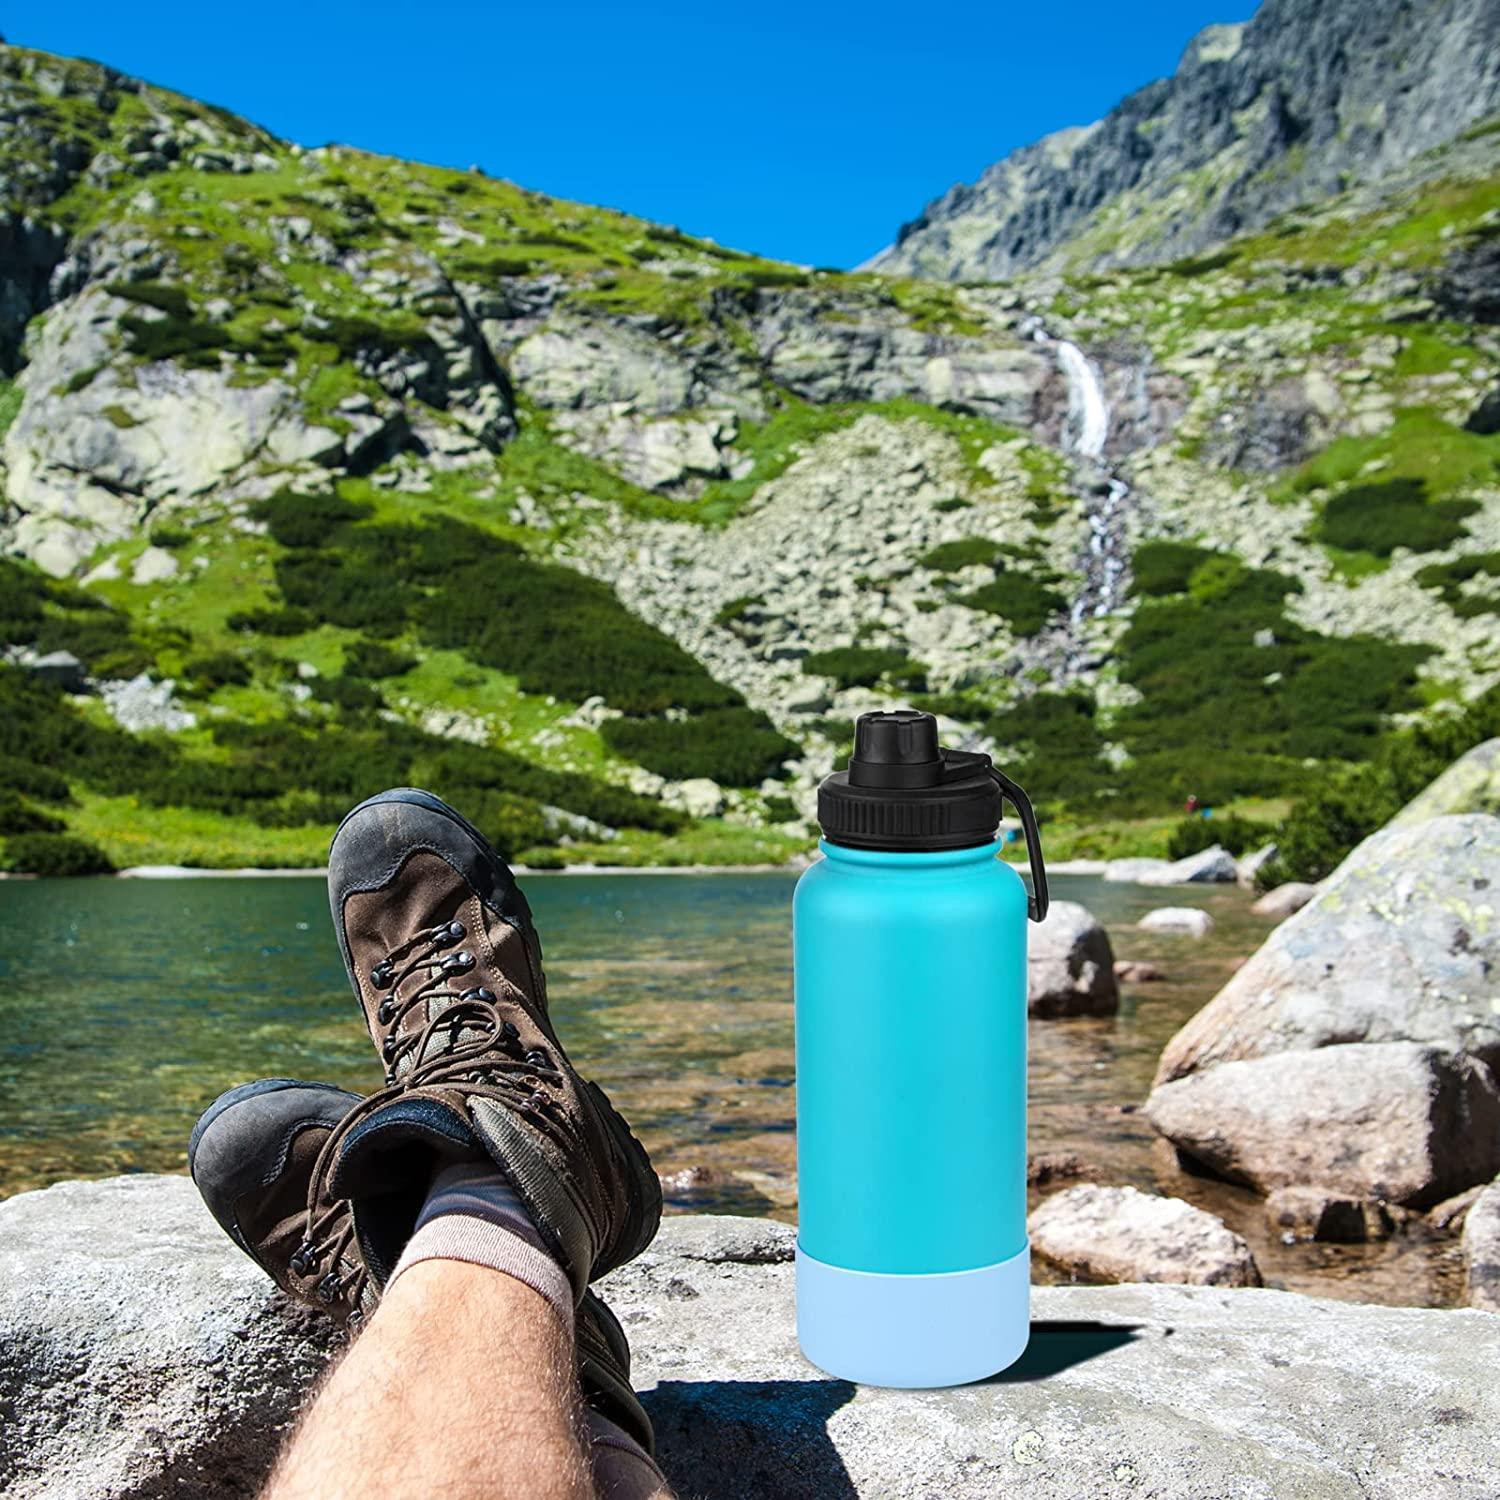 Protective Silicone Bottle Boot/Sleeve Hydro Flask Anti-Slip Bottom Cover  Hot US[12 to 24 oz,Teal] 